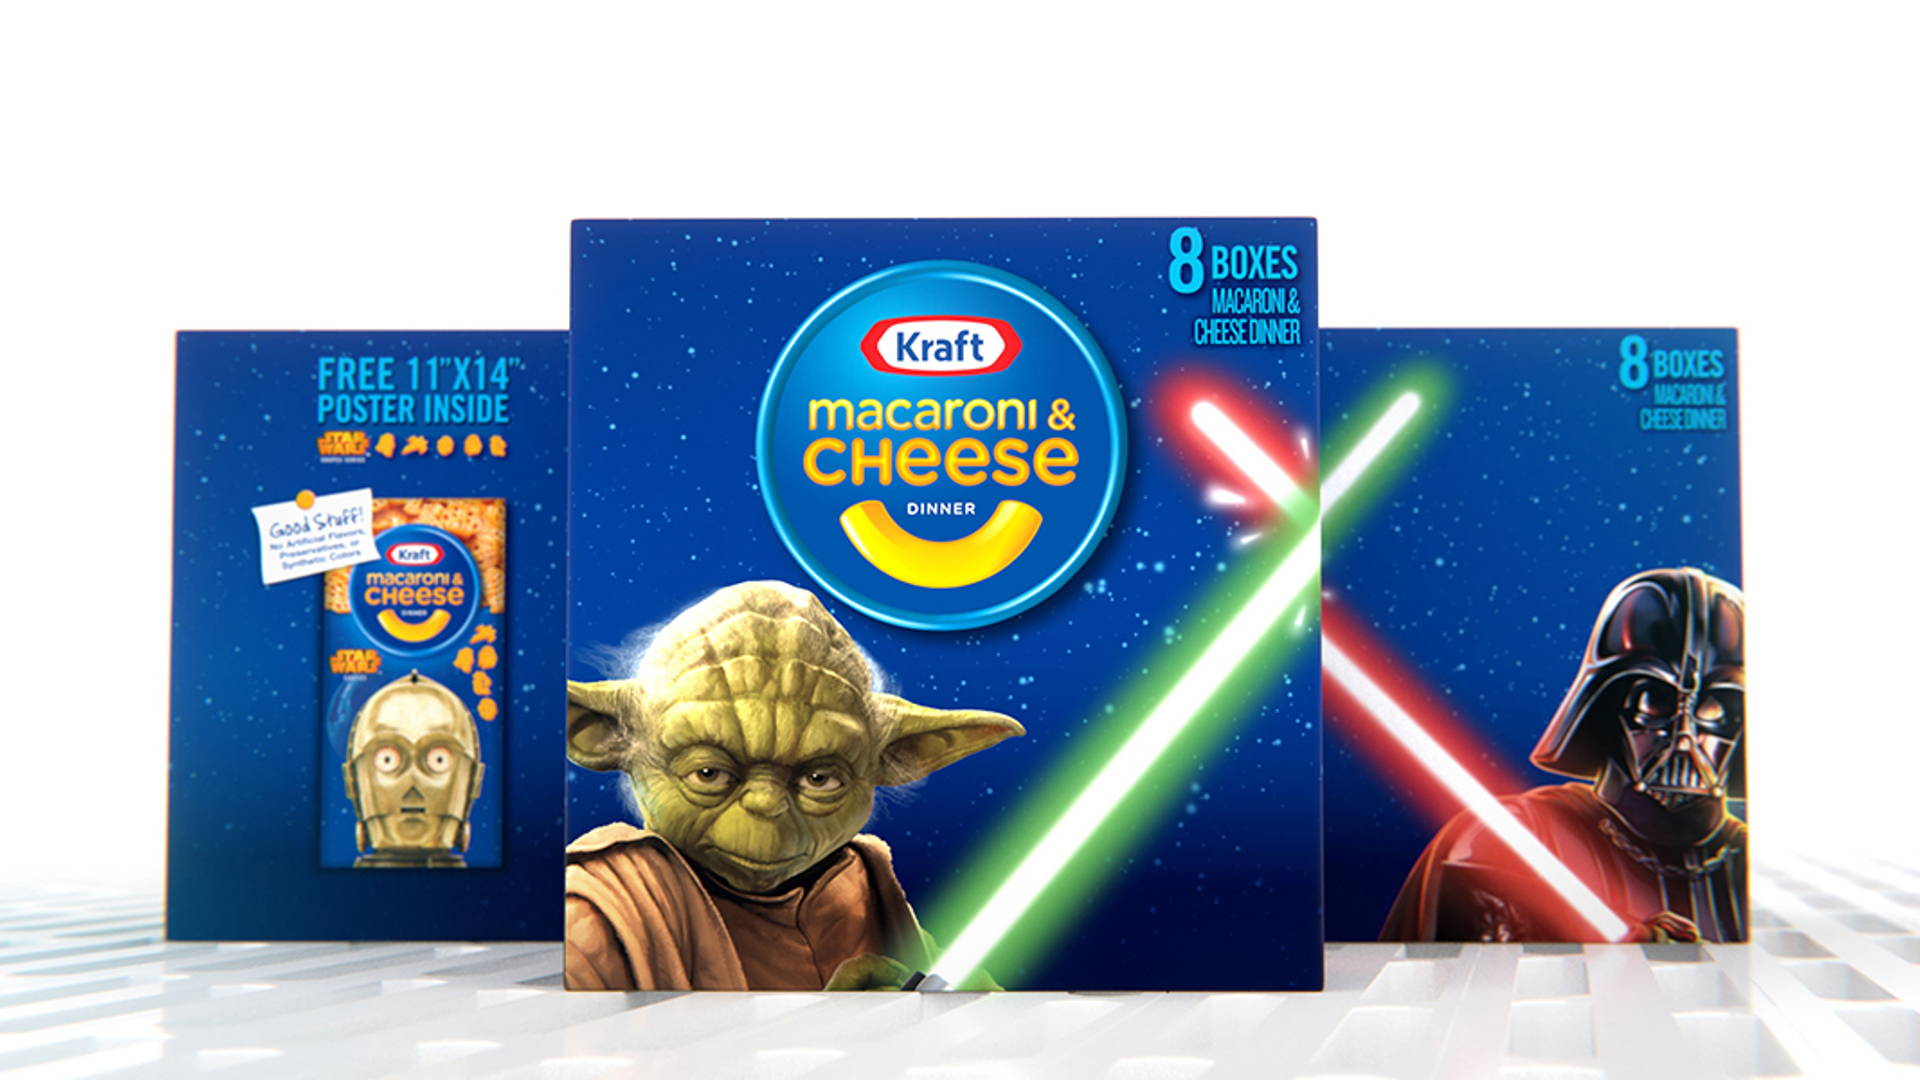 Featured image for Star Wars / Kraft Macaroni & Cheese